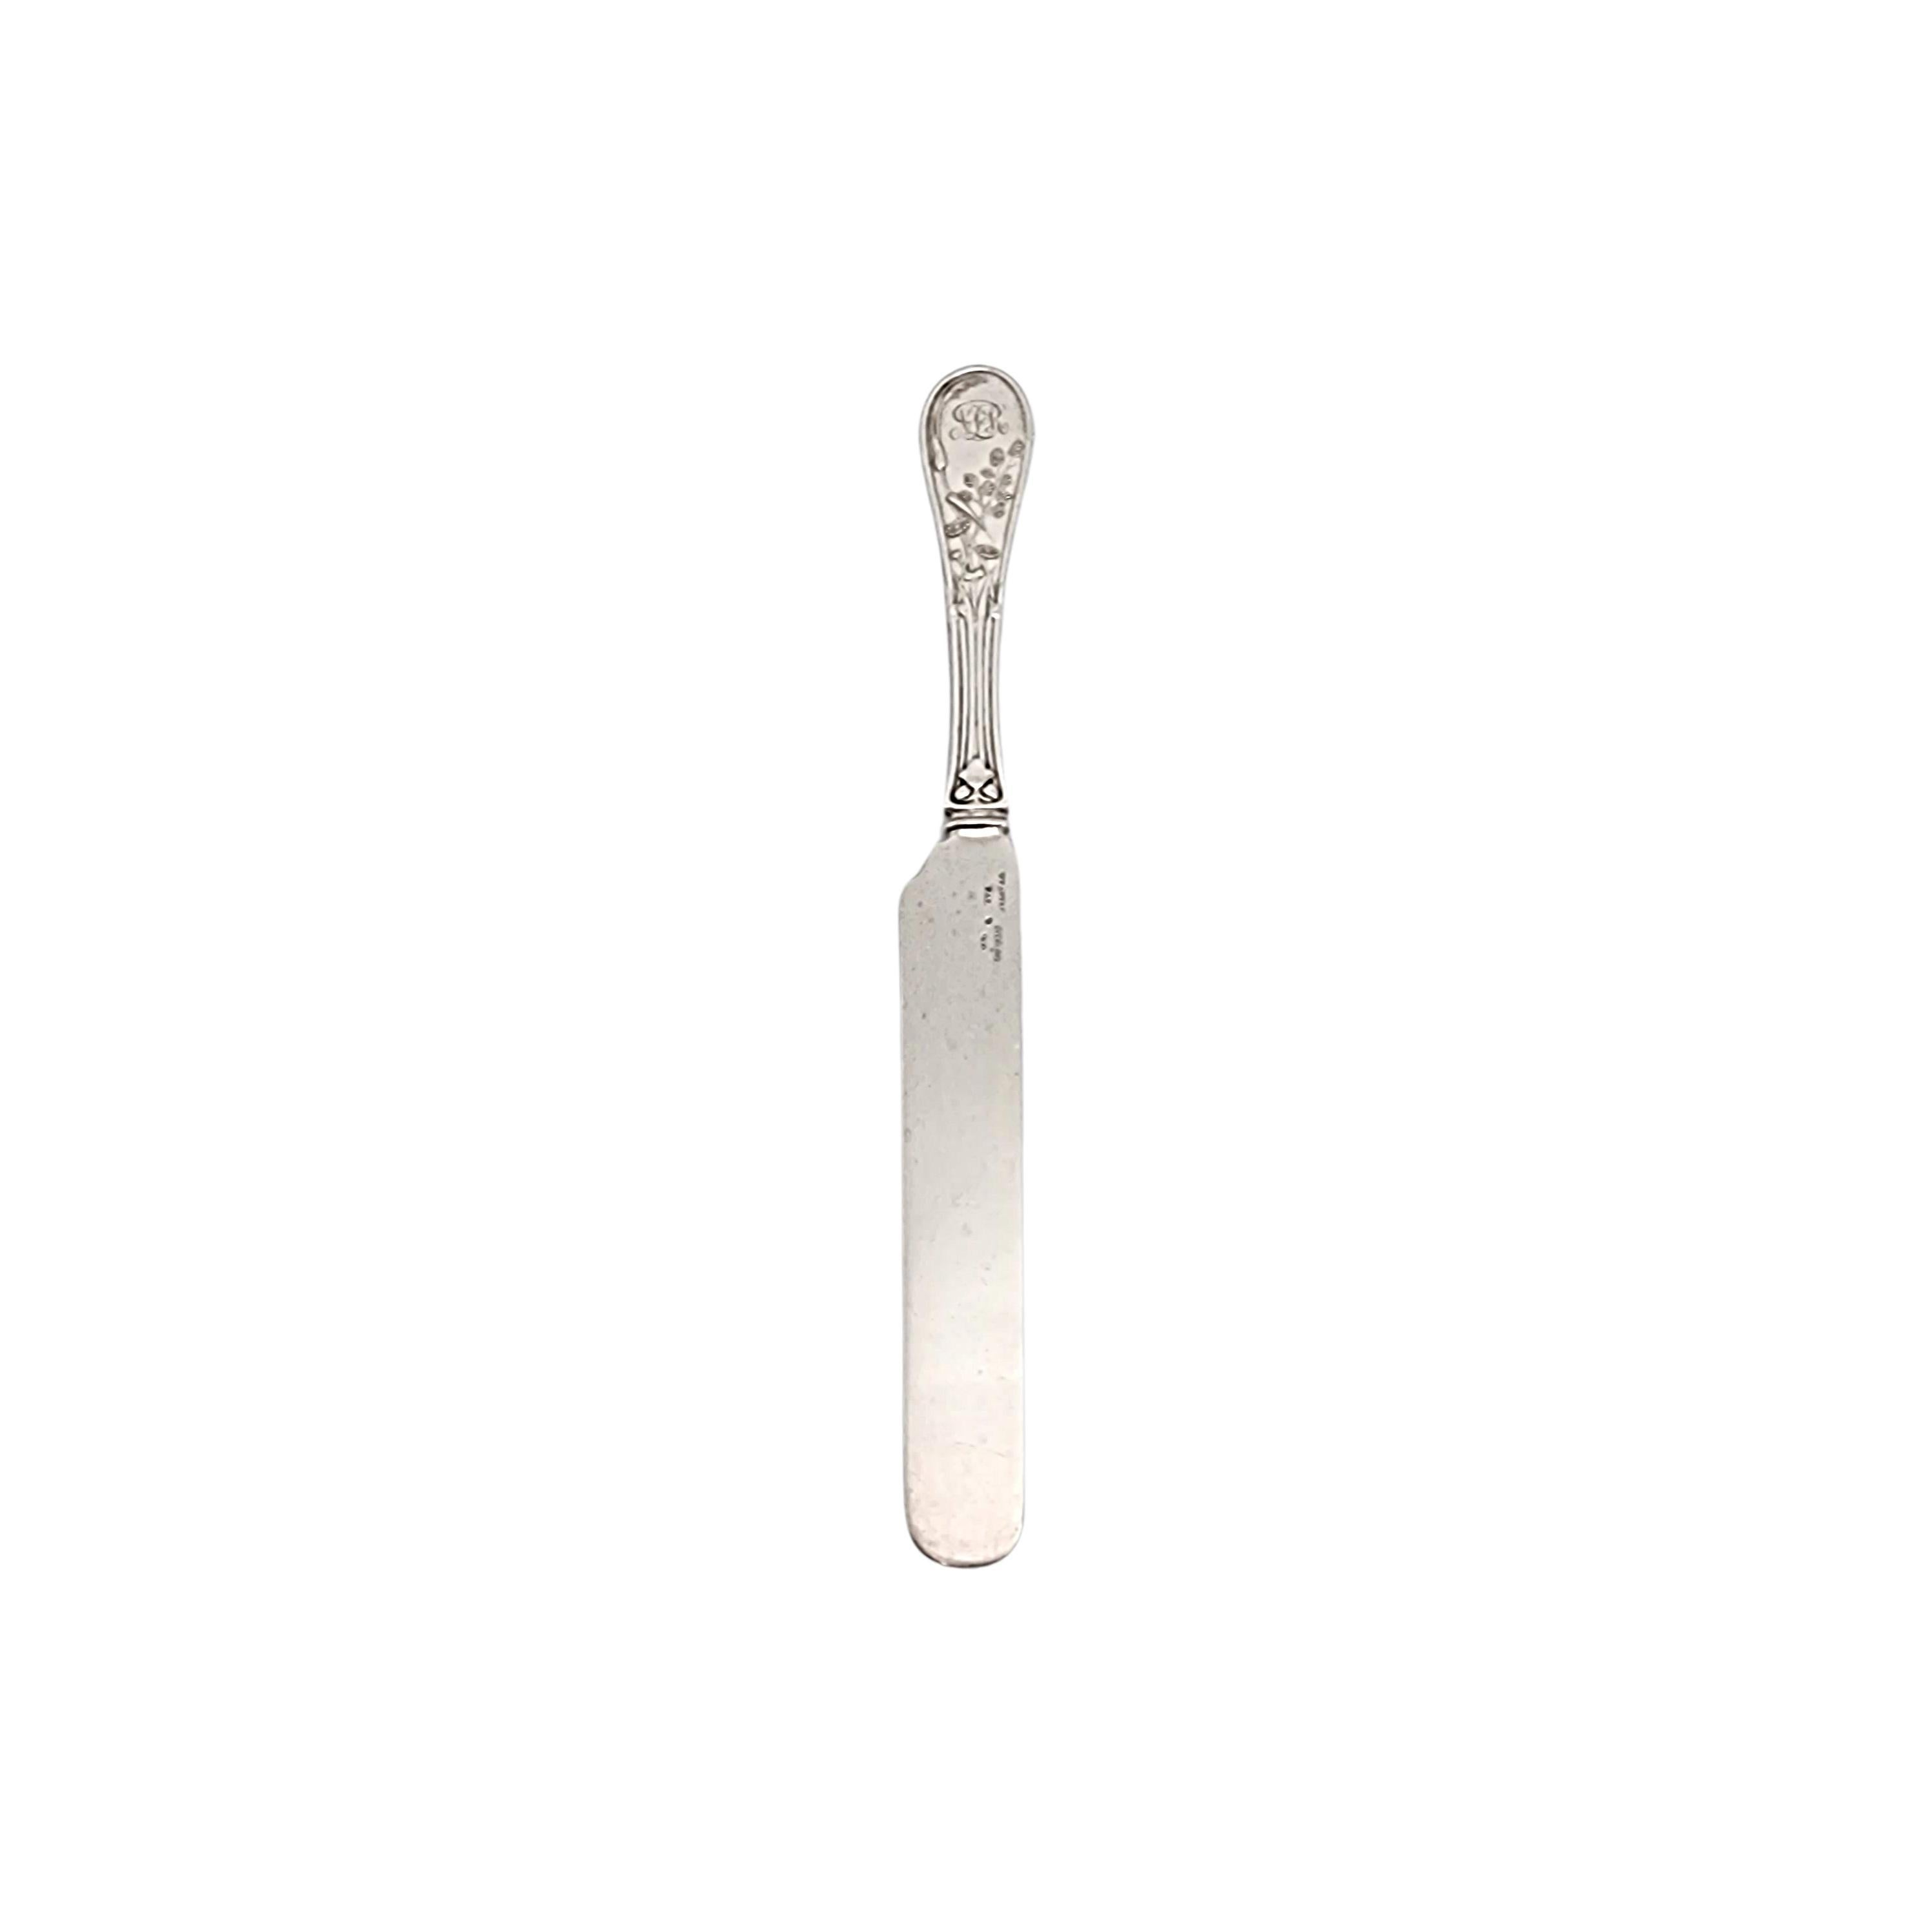 Sterling silver solid dessert knife by Tiffany & Co in the Japanese pattern with monogram.

Monogram appears to be NLeR

Designed by Edward C. Moore in 1871, the Japanese pattern was inspired by Japanese bird paintings of the 19th century. This